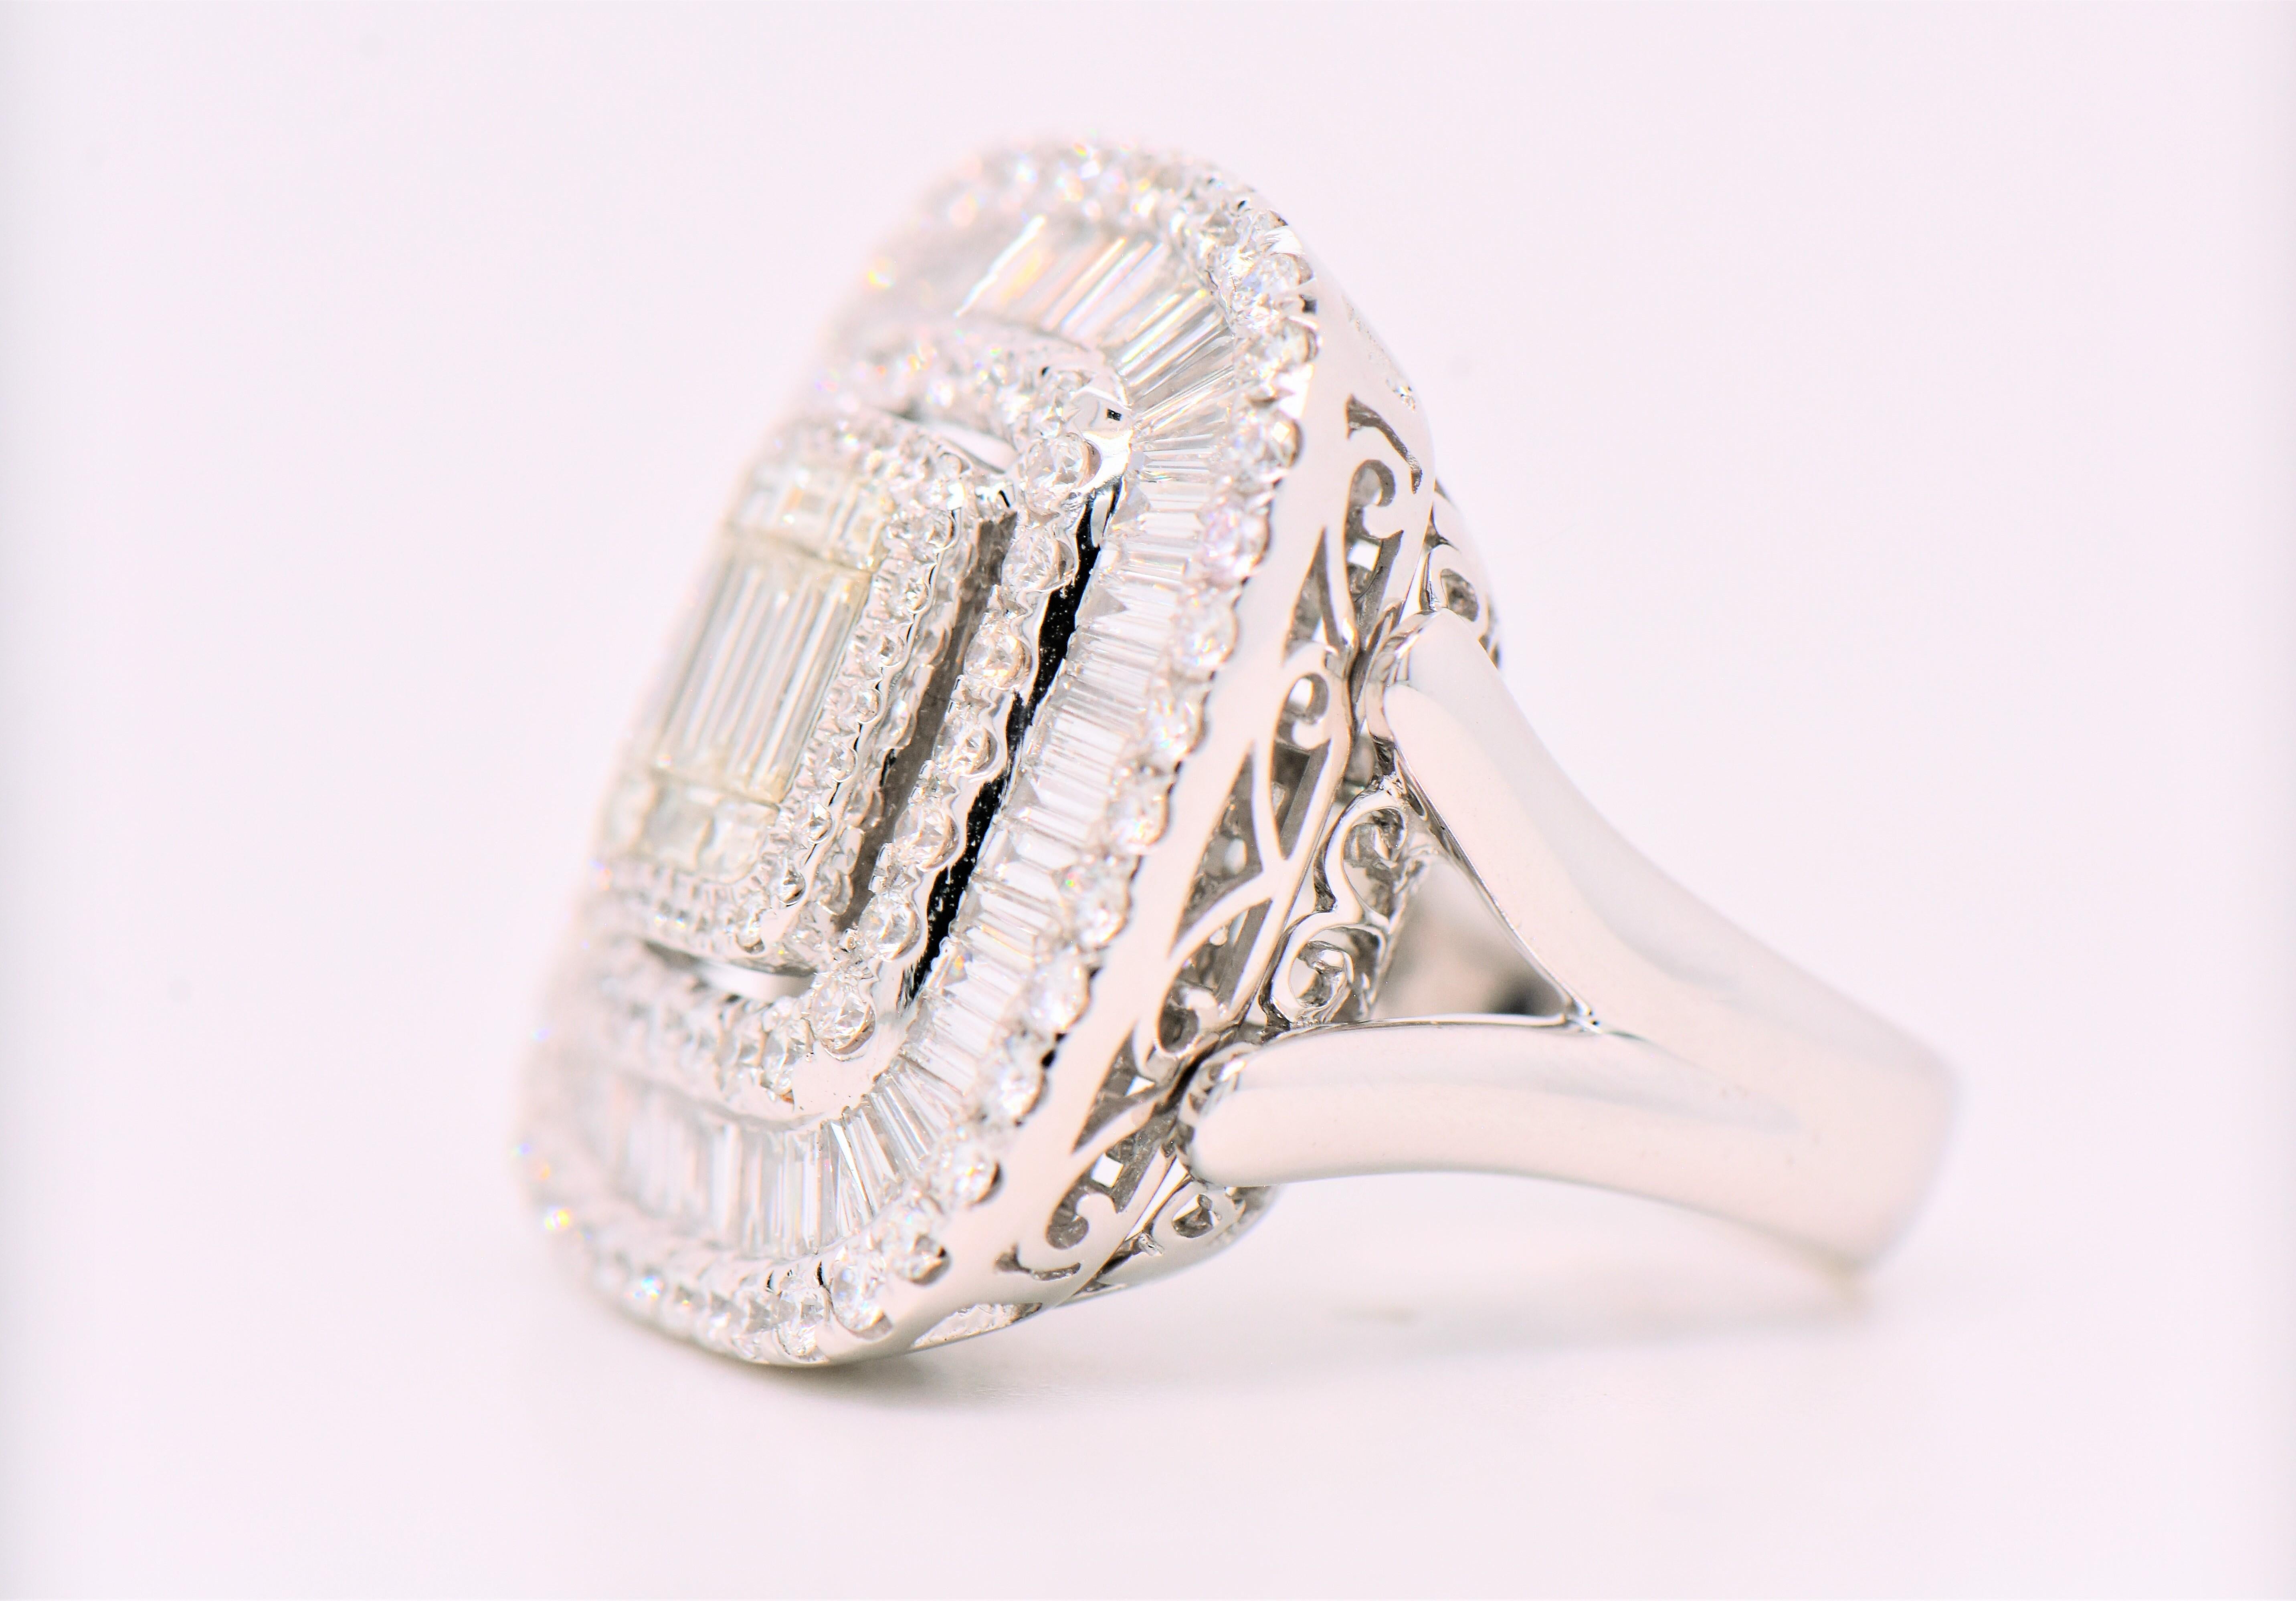 This beautiful Illusion Set white gold engagement ring features a round brilliant-cut diamond weighing 1.98 carats, with VS clarity and G color. The central stone is accented on around sides by a channel-set baguettes diamond. The baguettes weigh